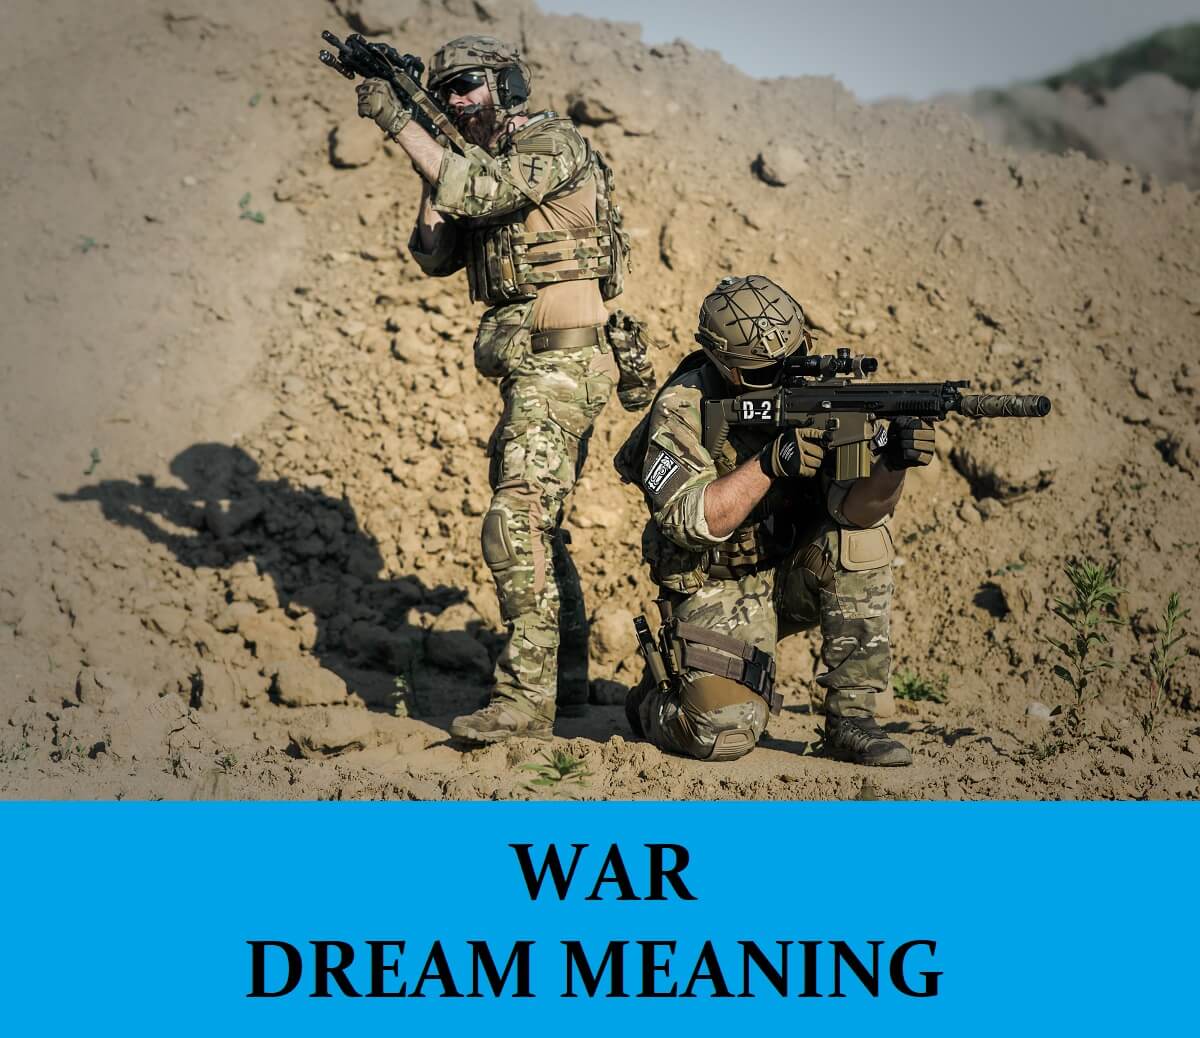 Dream About Wars